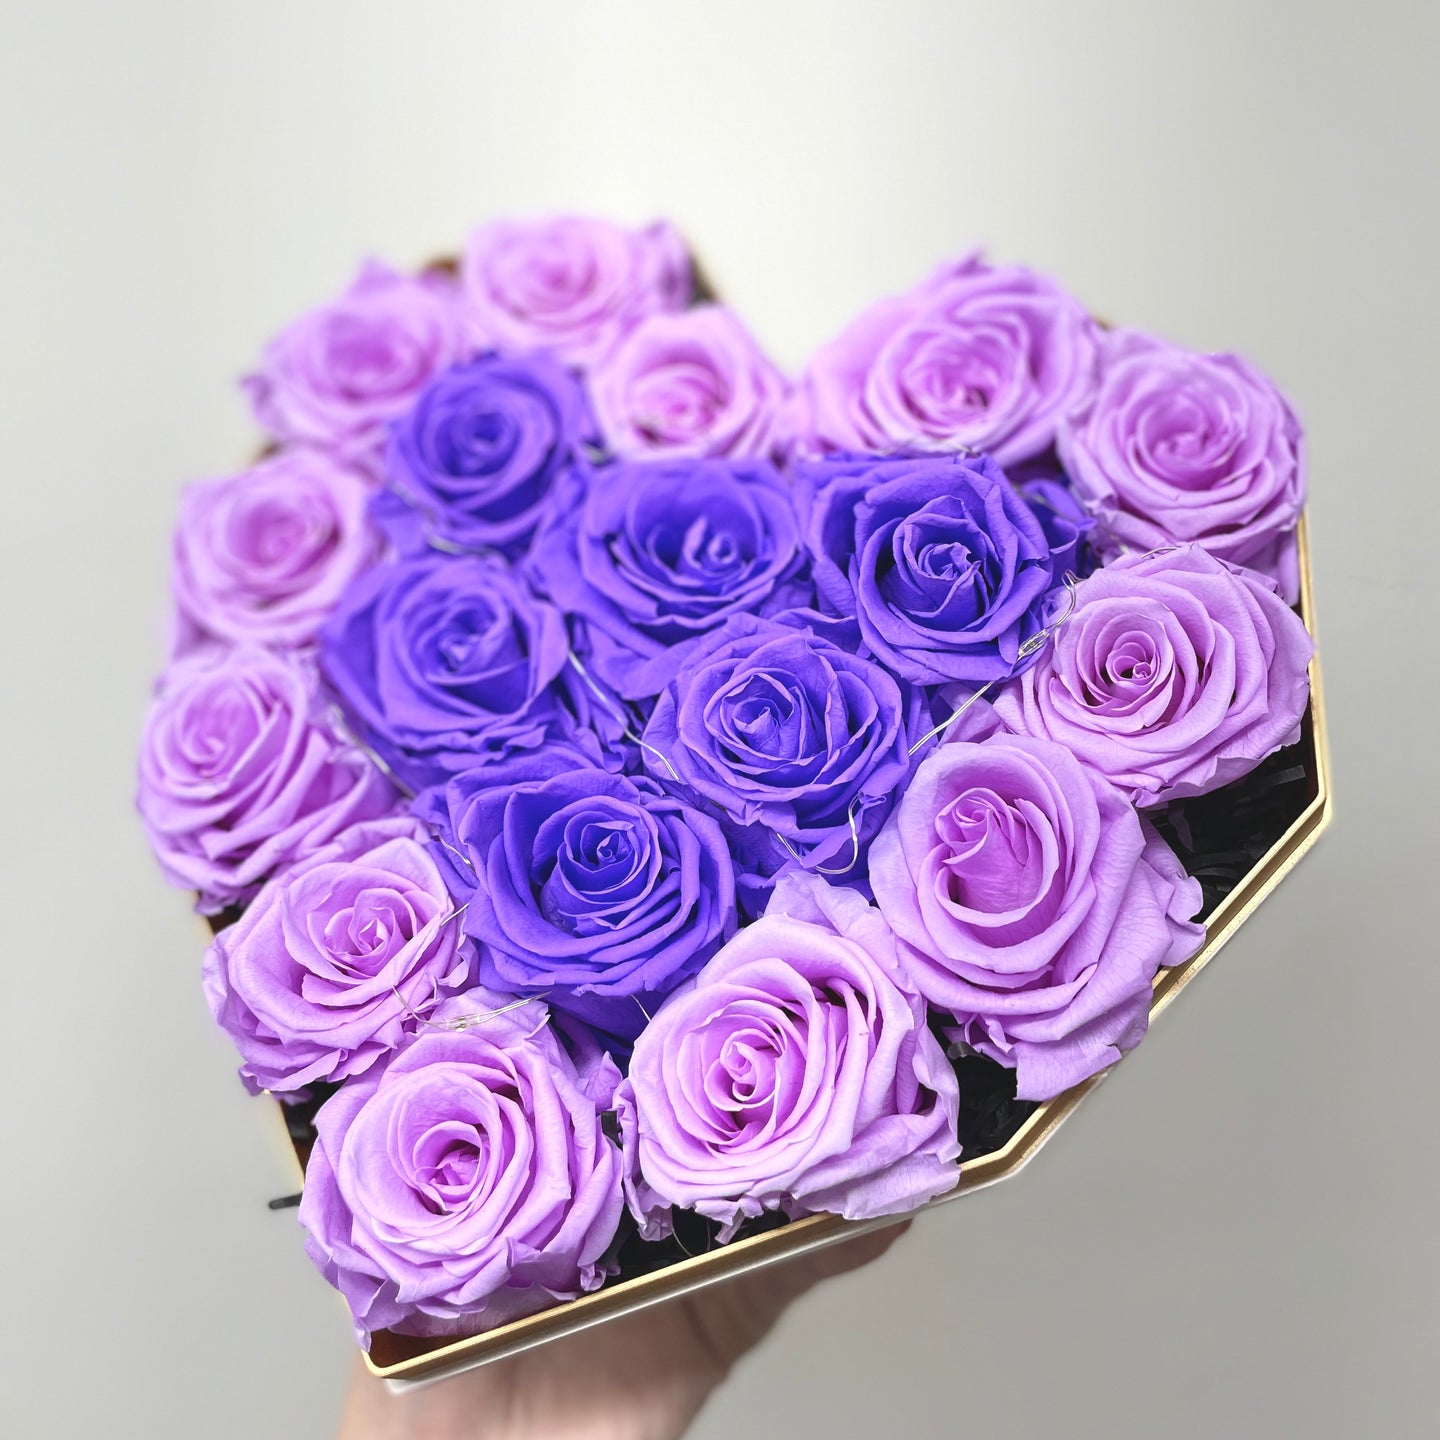 Large Love Box, Double Purple Preserved Roses